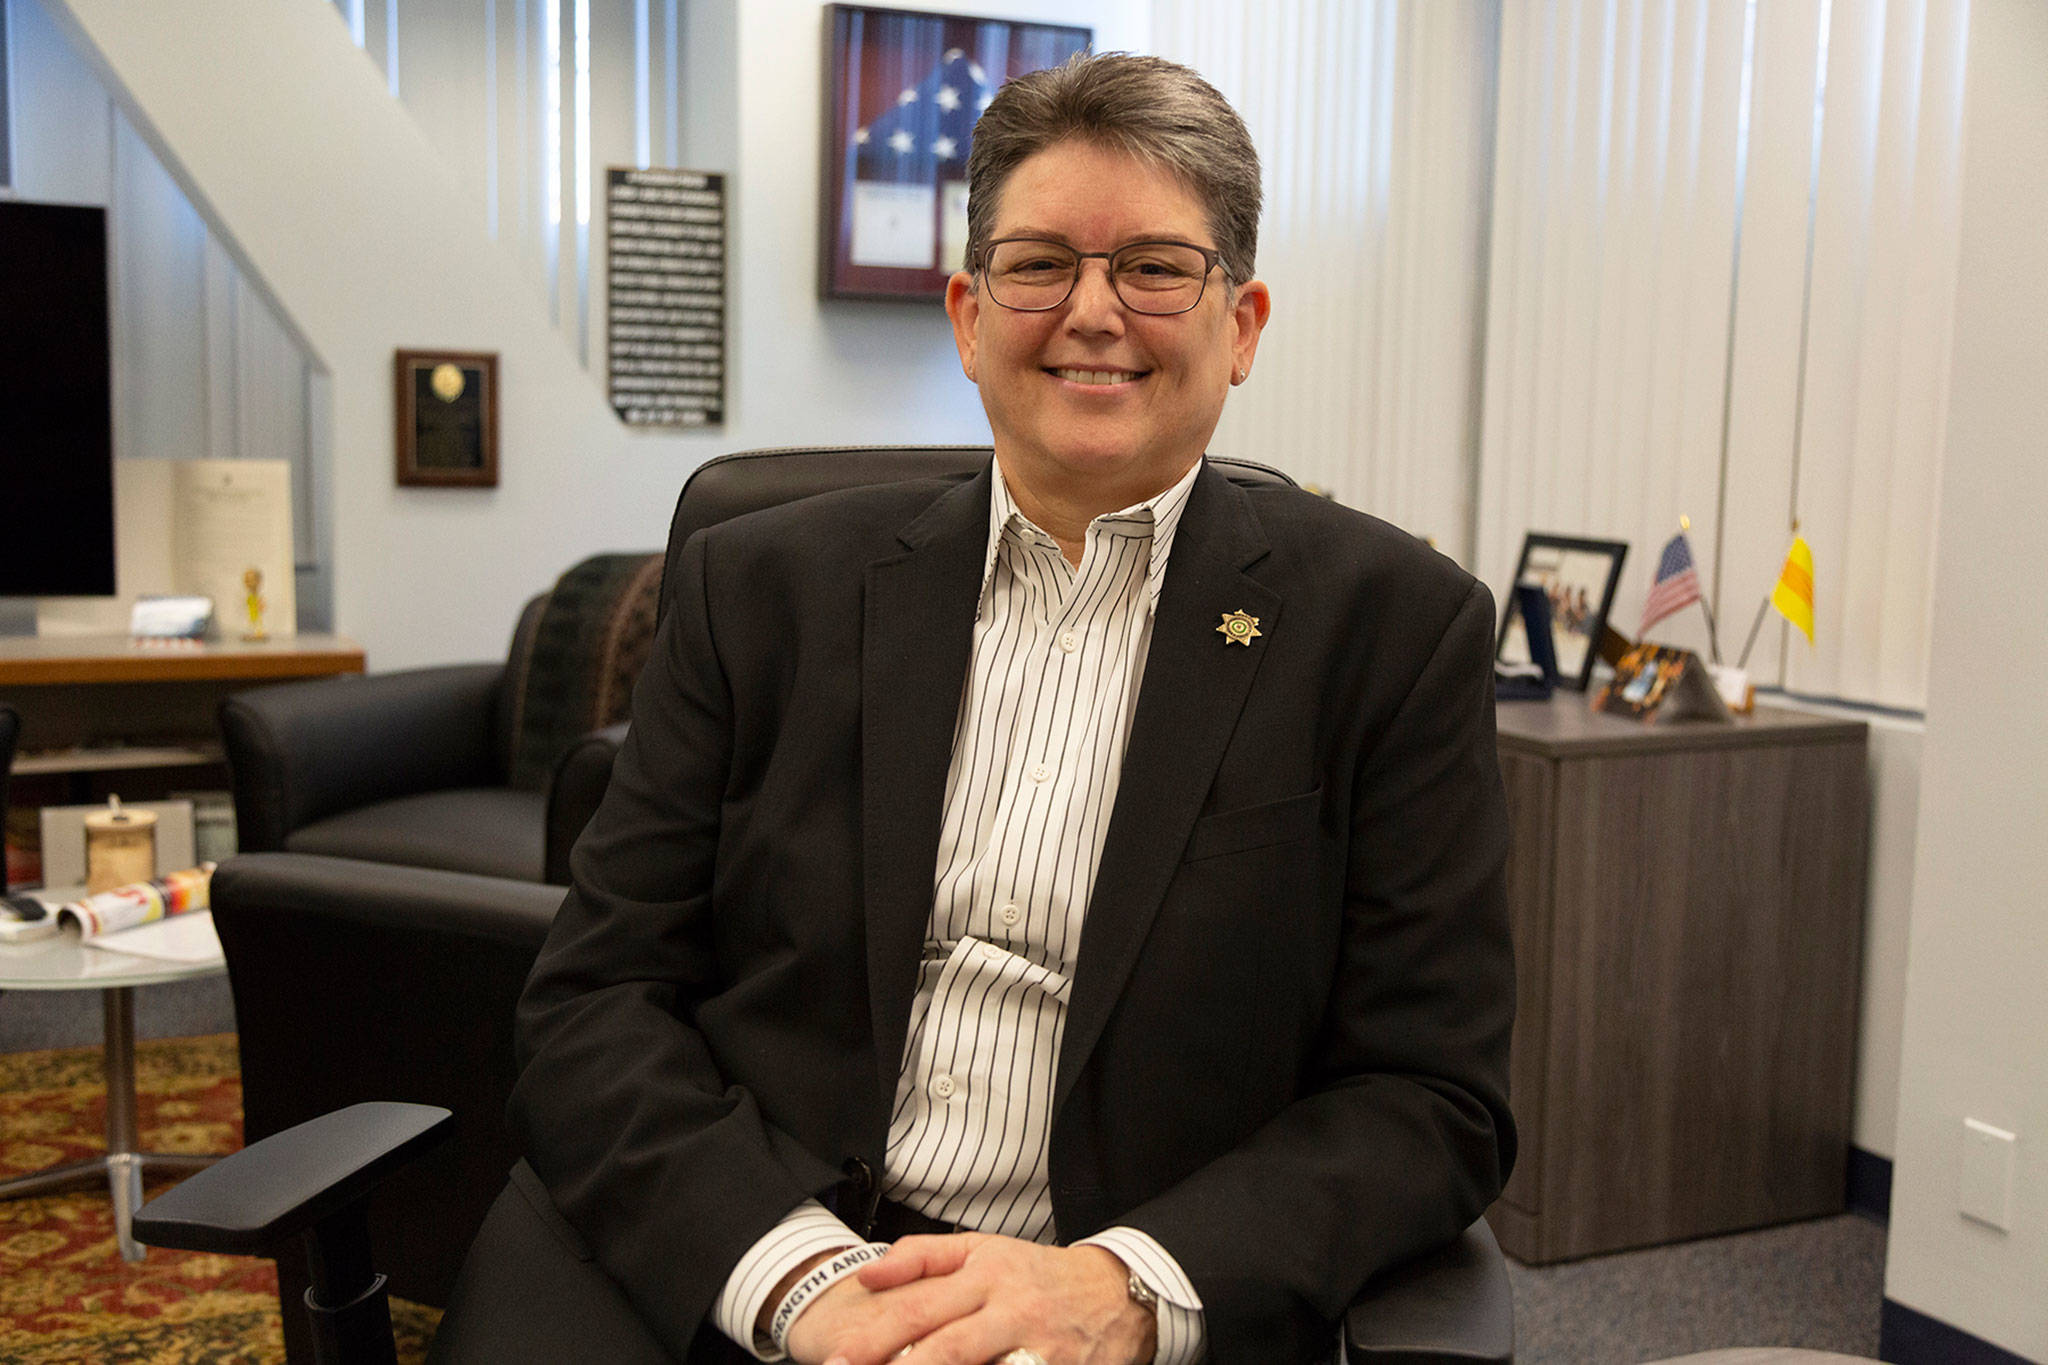 King County Sheriff Mitzi Johanknecht started her career in law enforcement in 1985, and was elected in 2017. Ashley Hiruko/staff photo